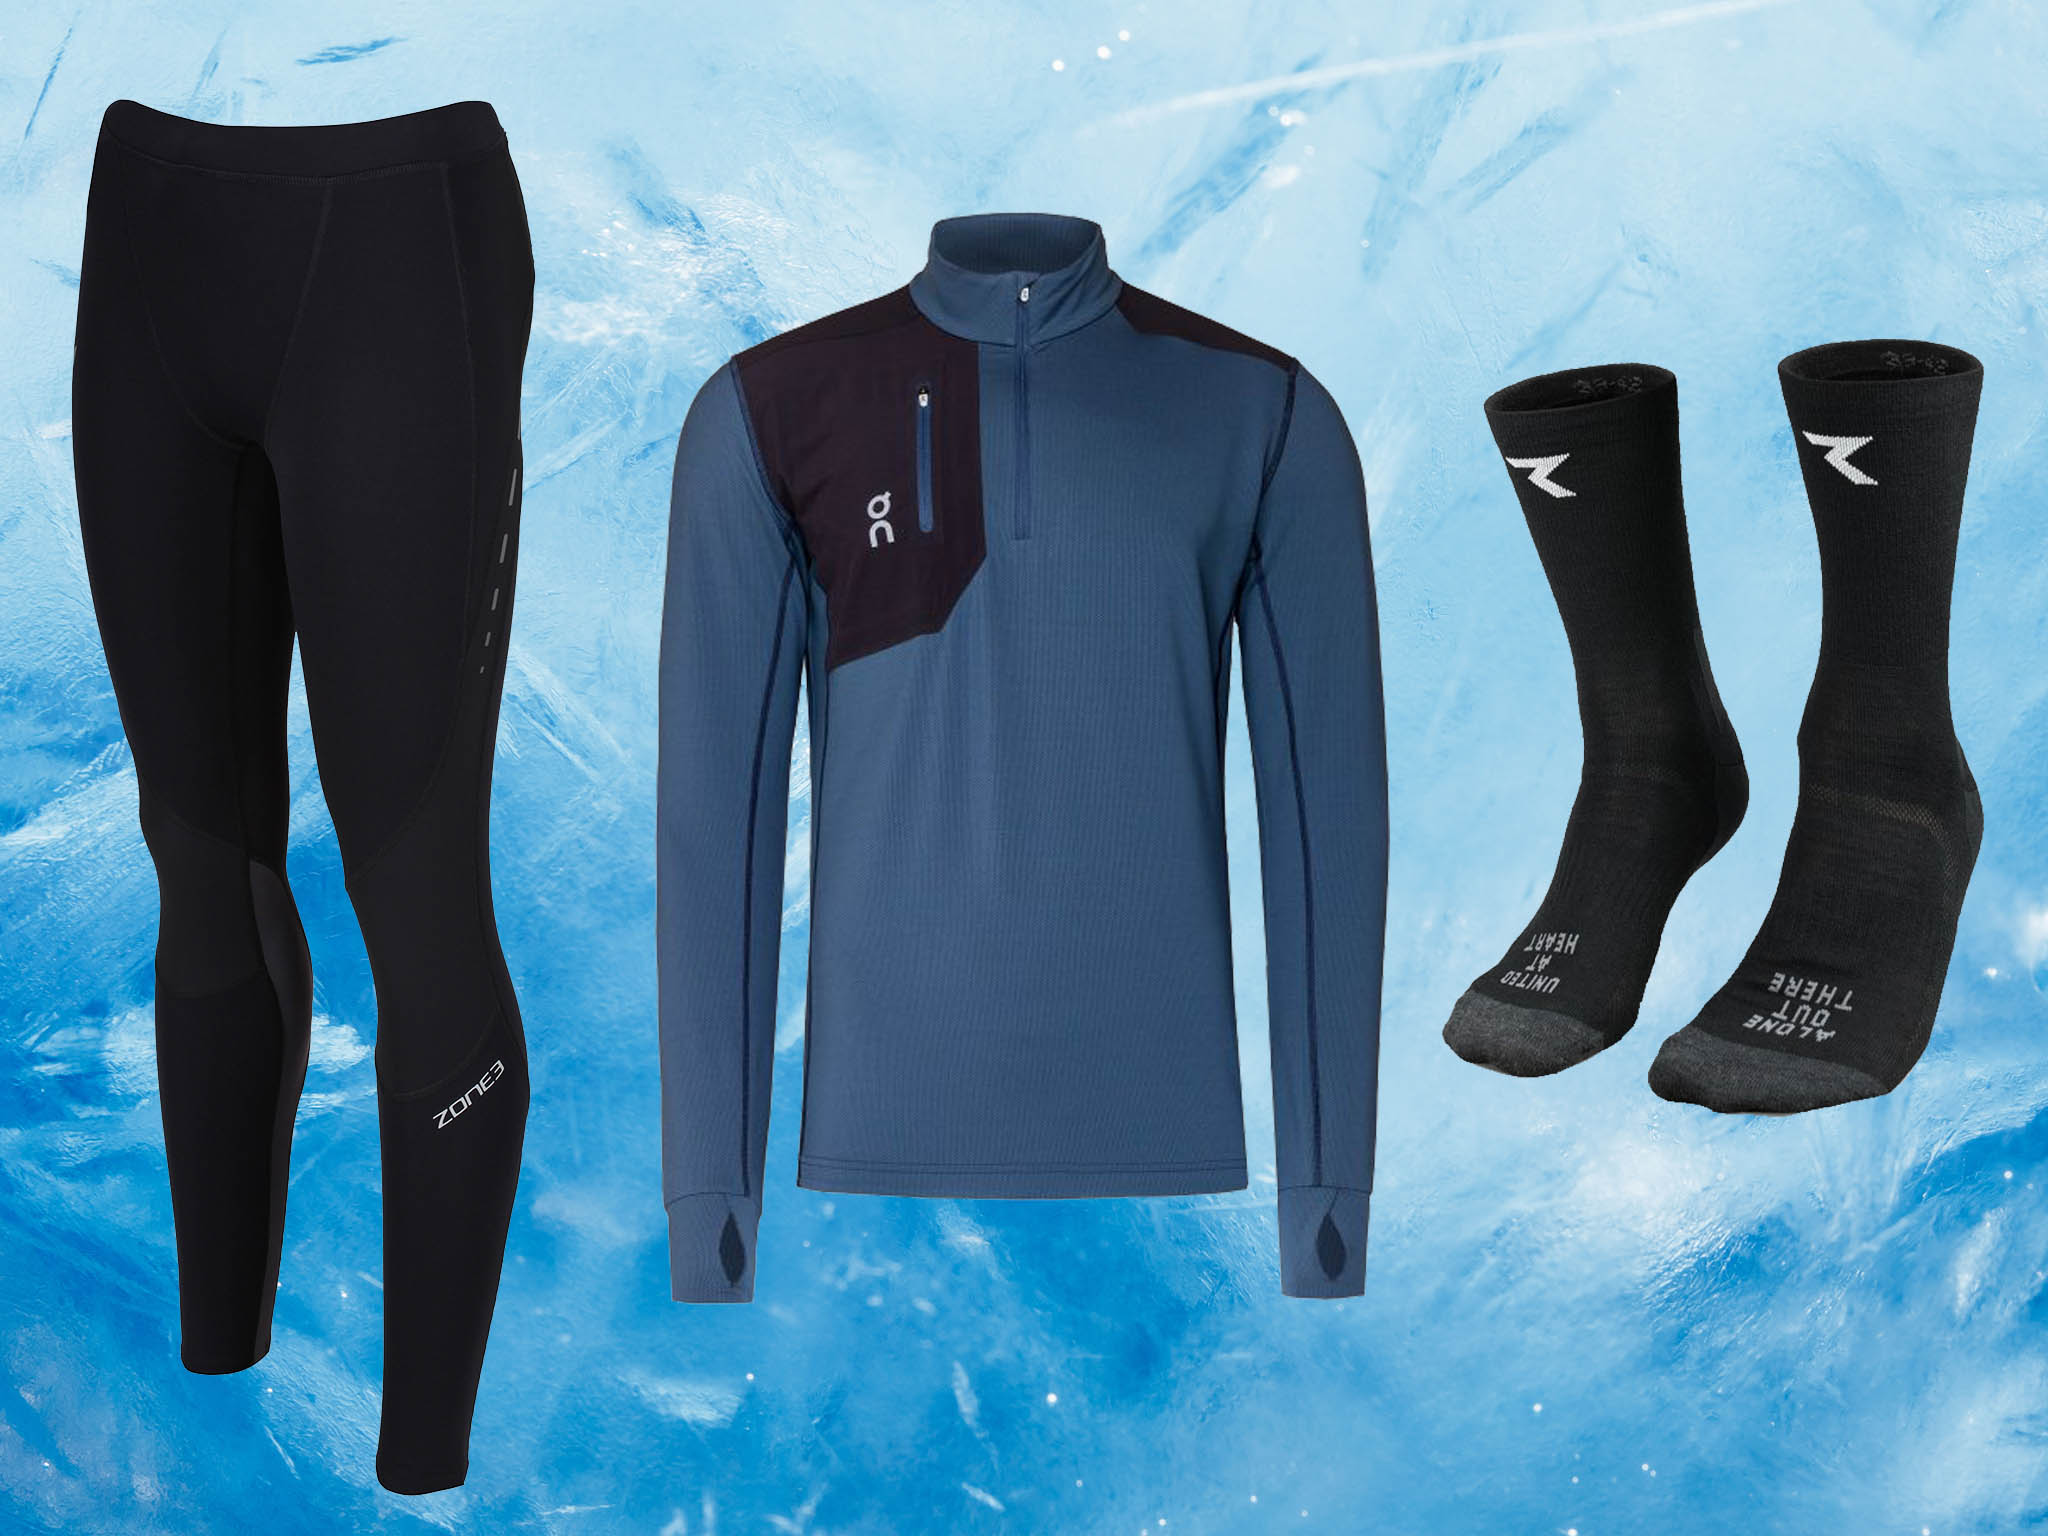 Best men's winter running gear to kit you out for all weather Independent